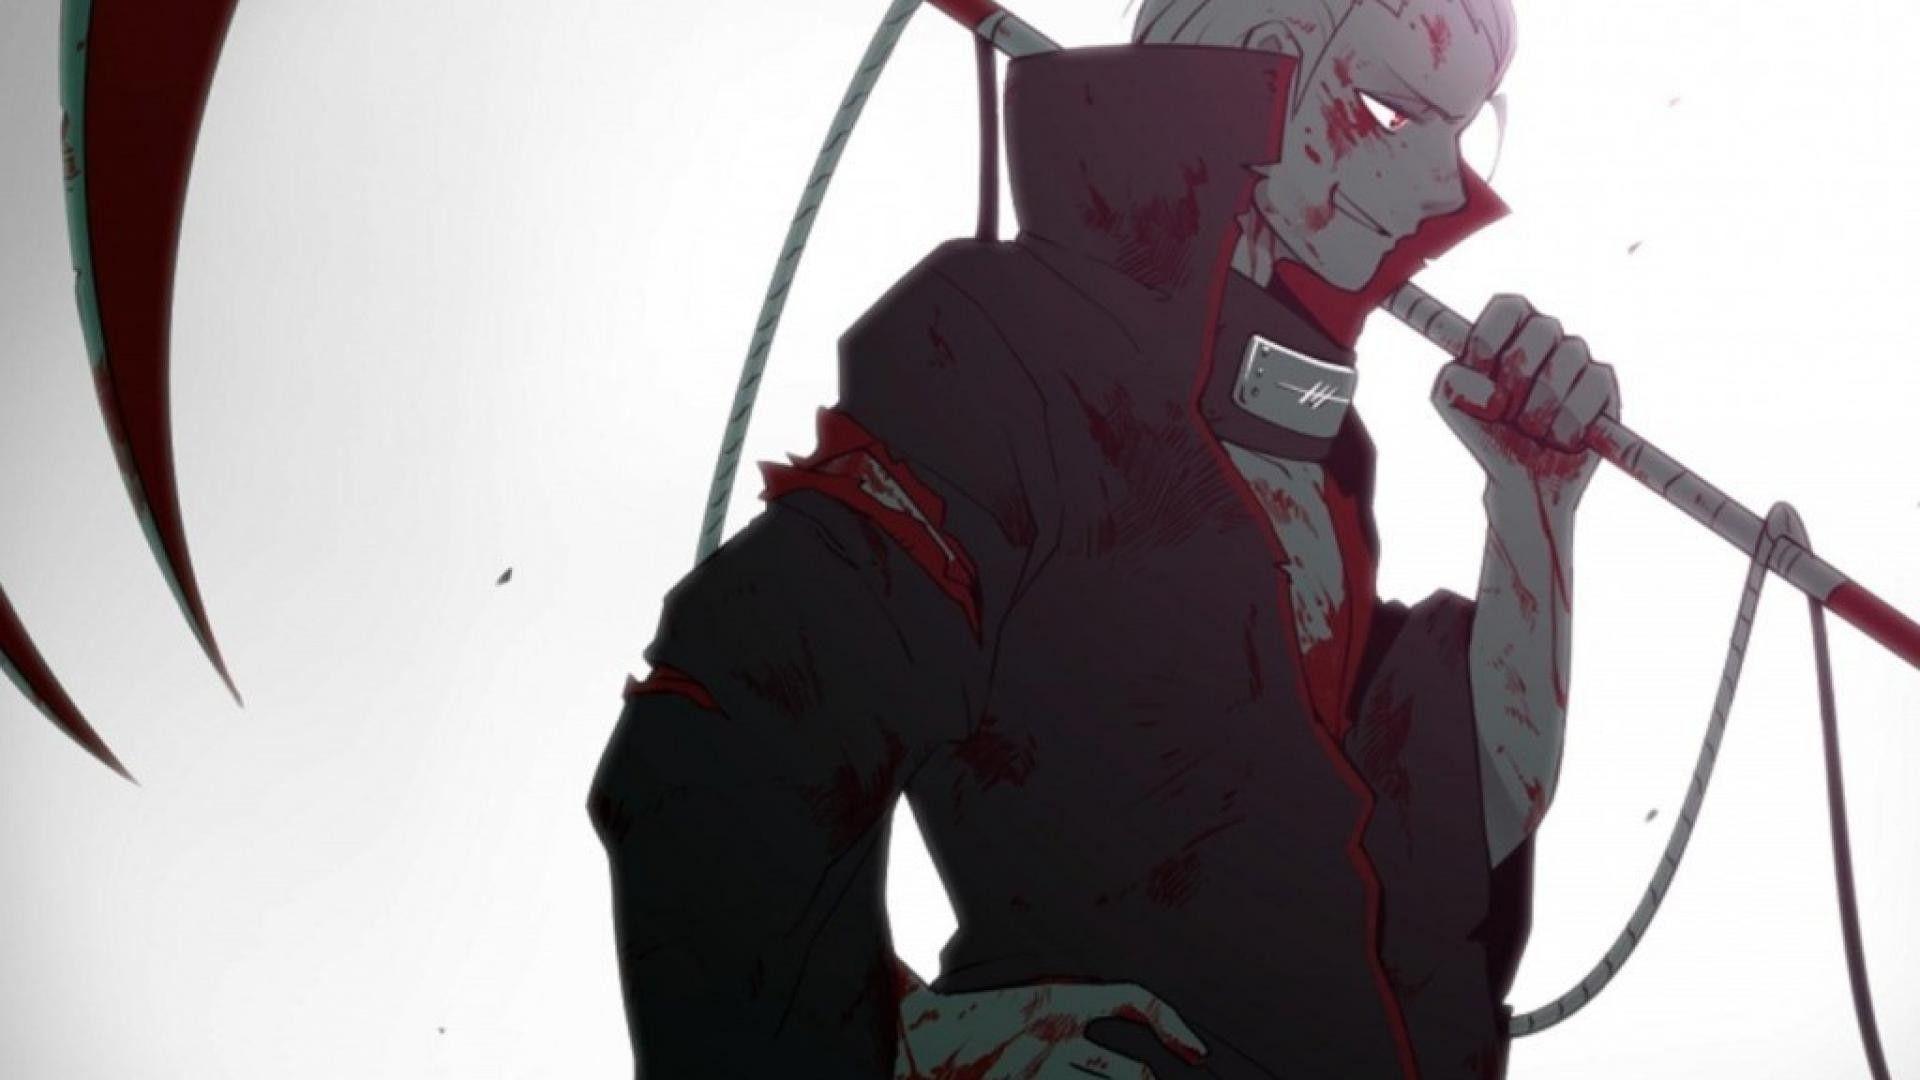 10 Hidan Wallpapers for iPhone and Android by Heather Fitzgerald